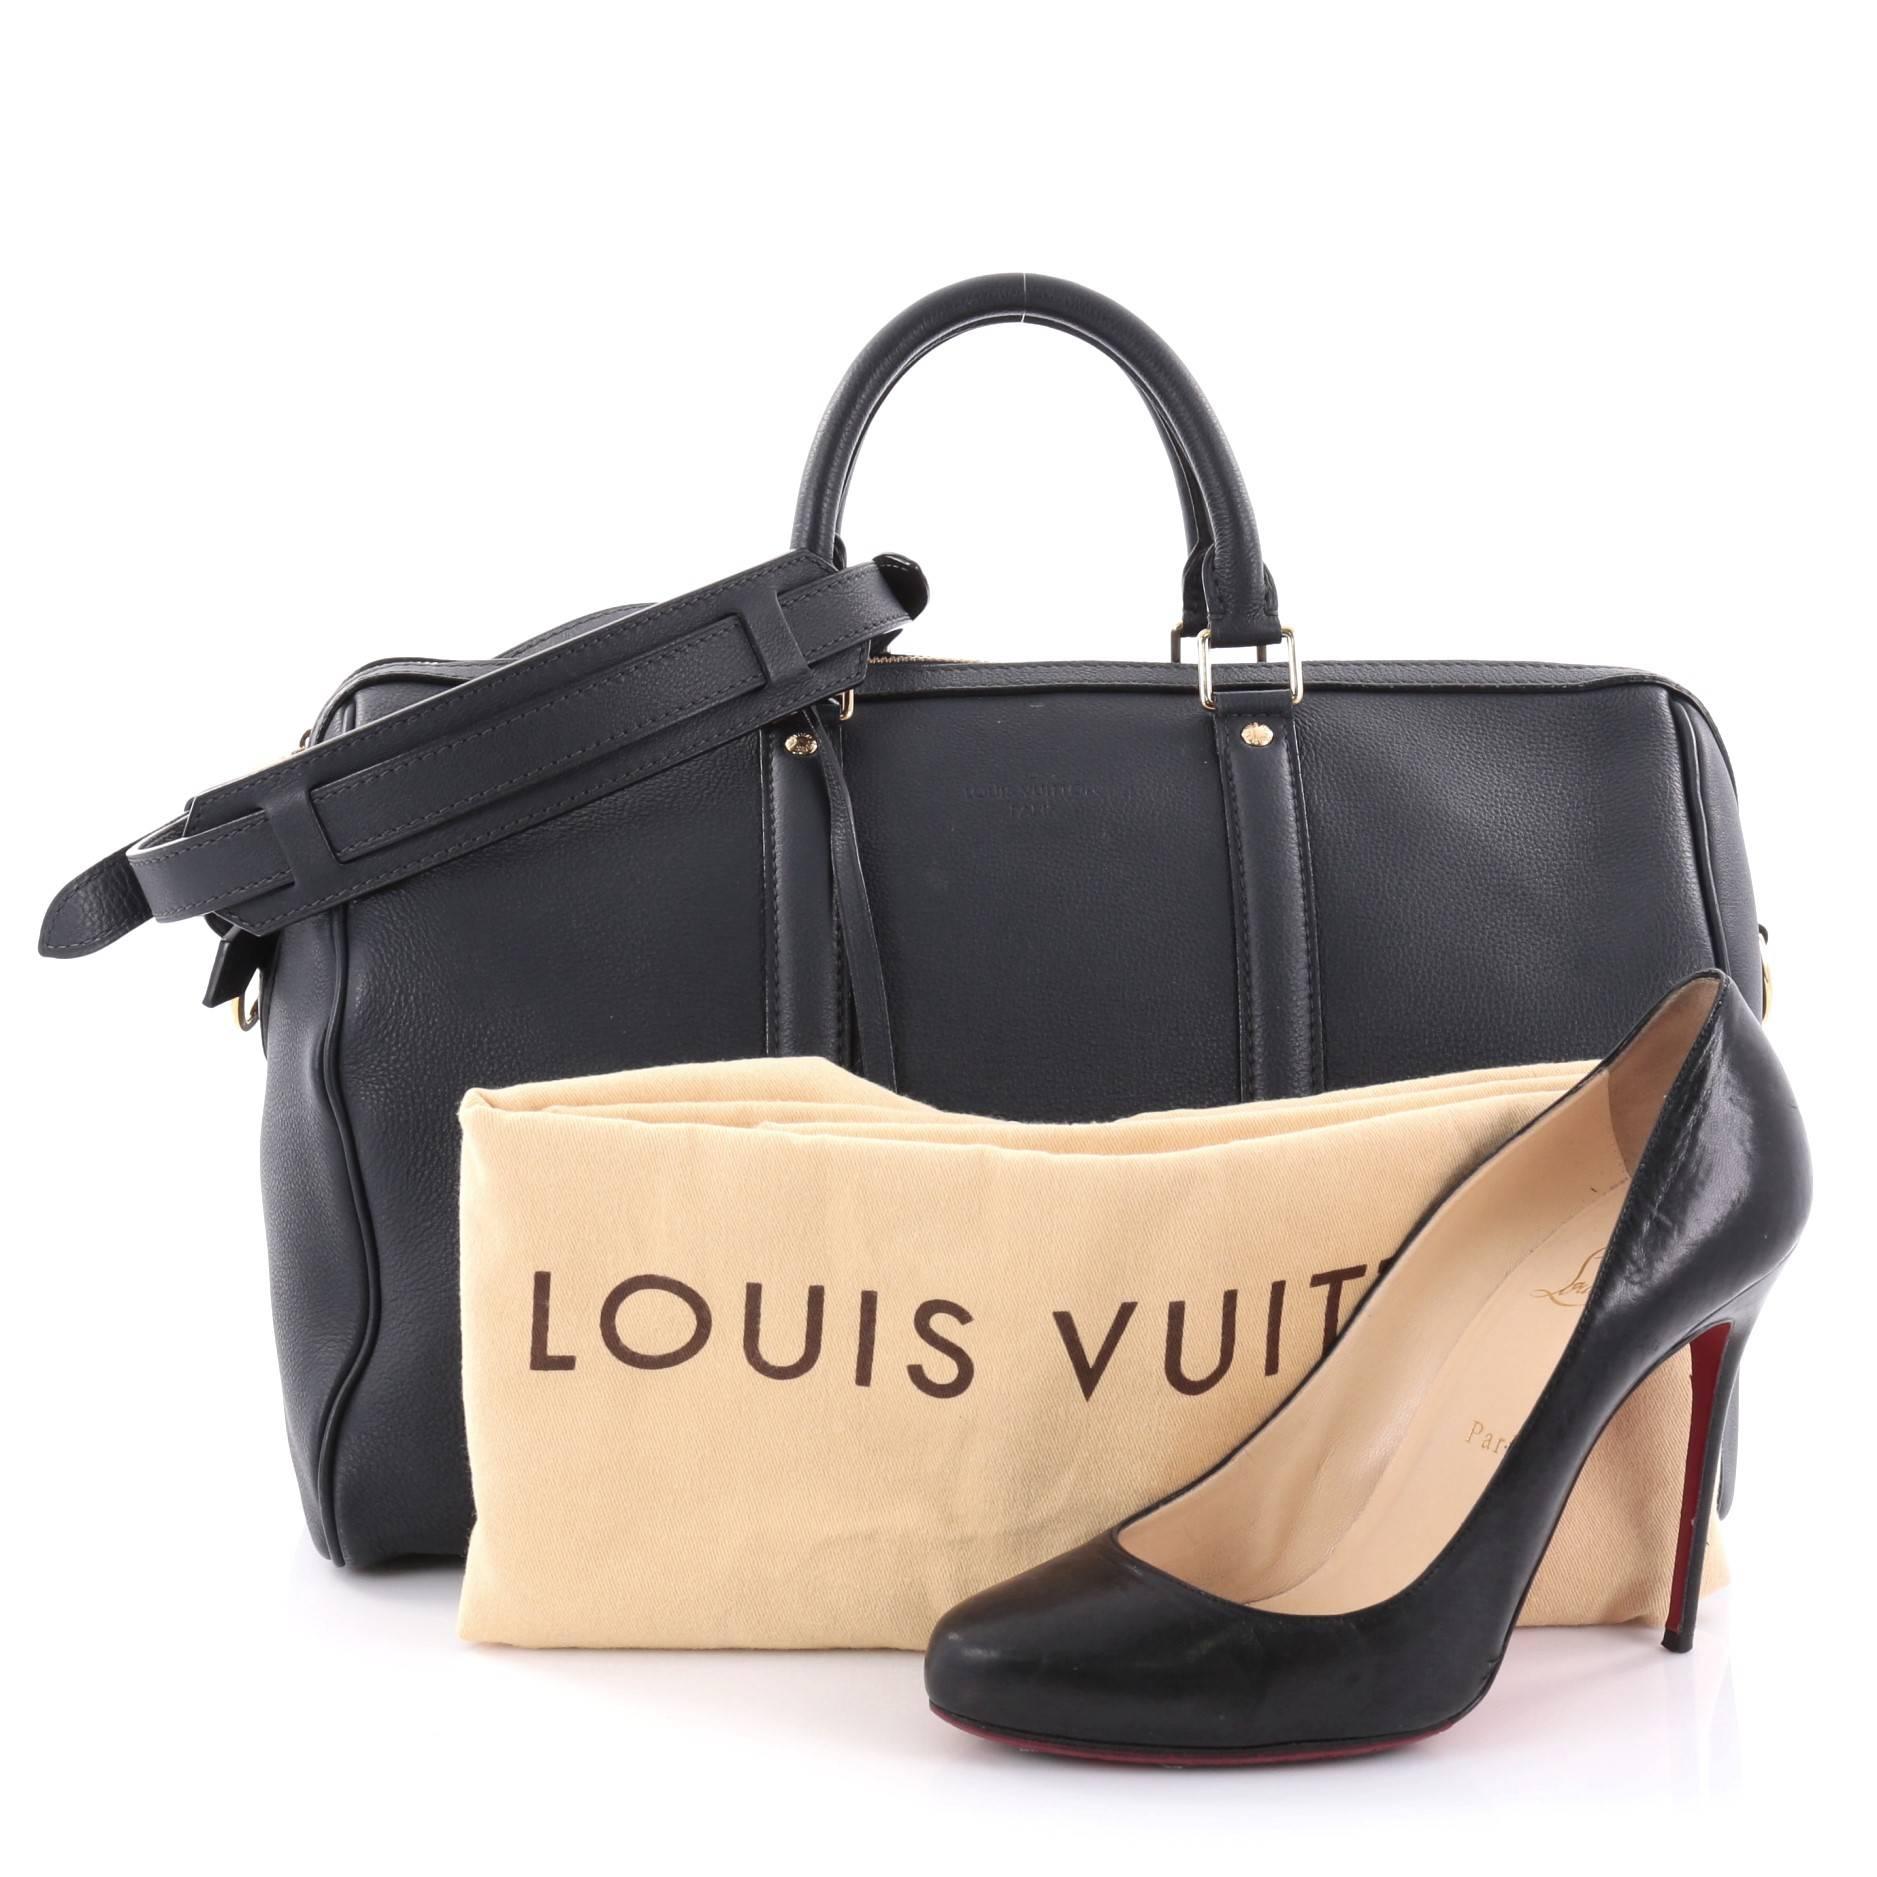 This authentic Louis Vuitton Sofia Coppola SC Bag Leather MM is as stylish and elegant as its designer. Crafted from navy blue leather, this simple yet refined duffle bag features sturdy rolled handles, adjustable shoulder strap, protective base